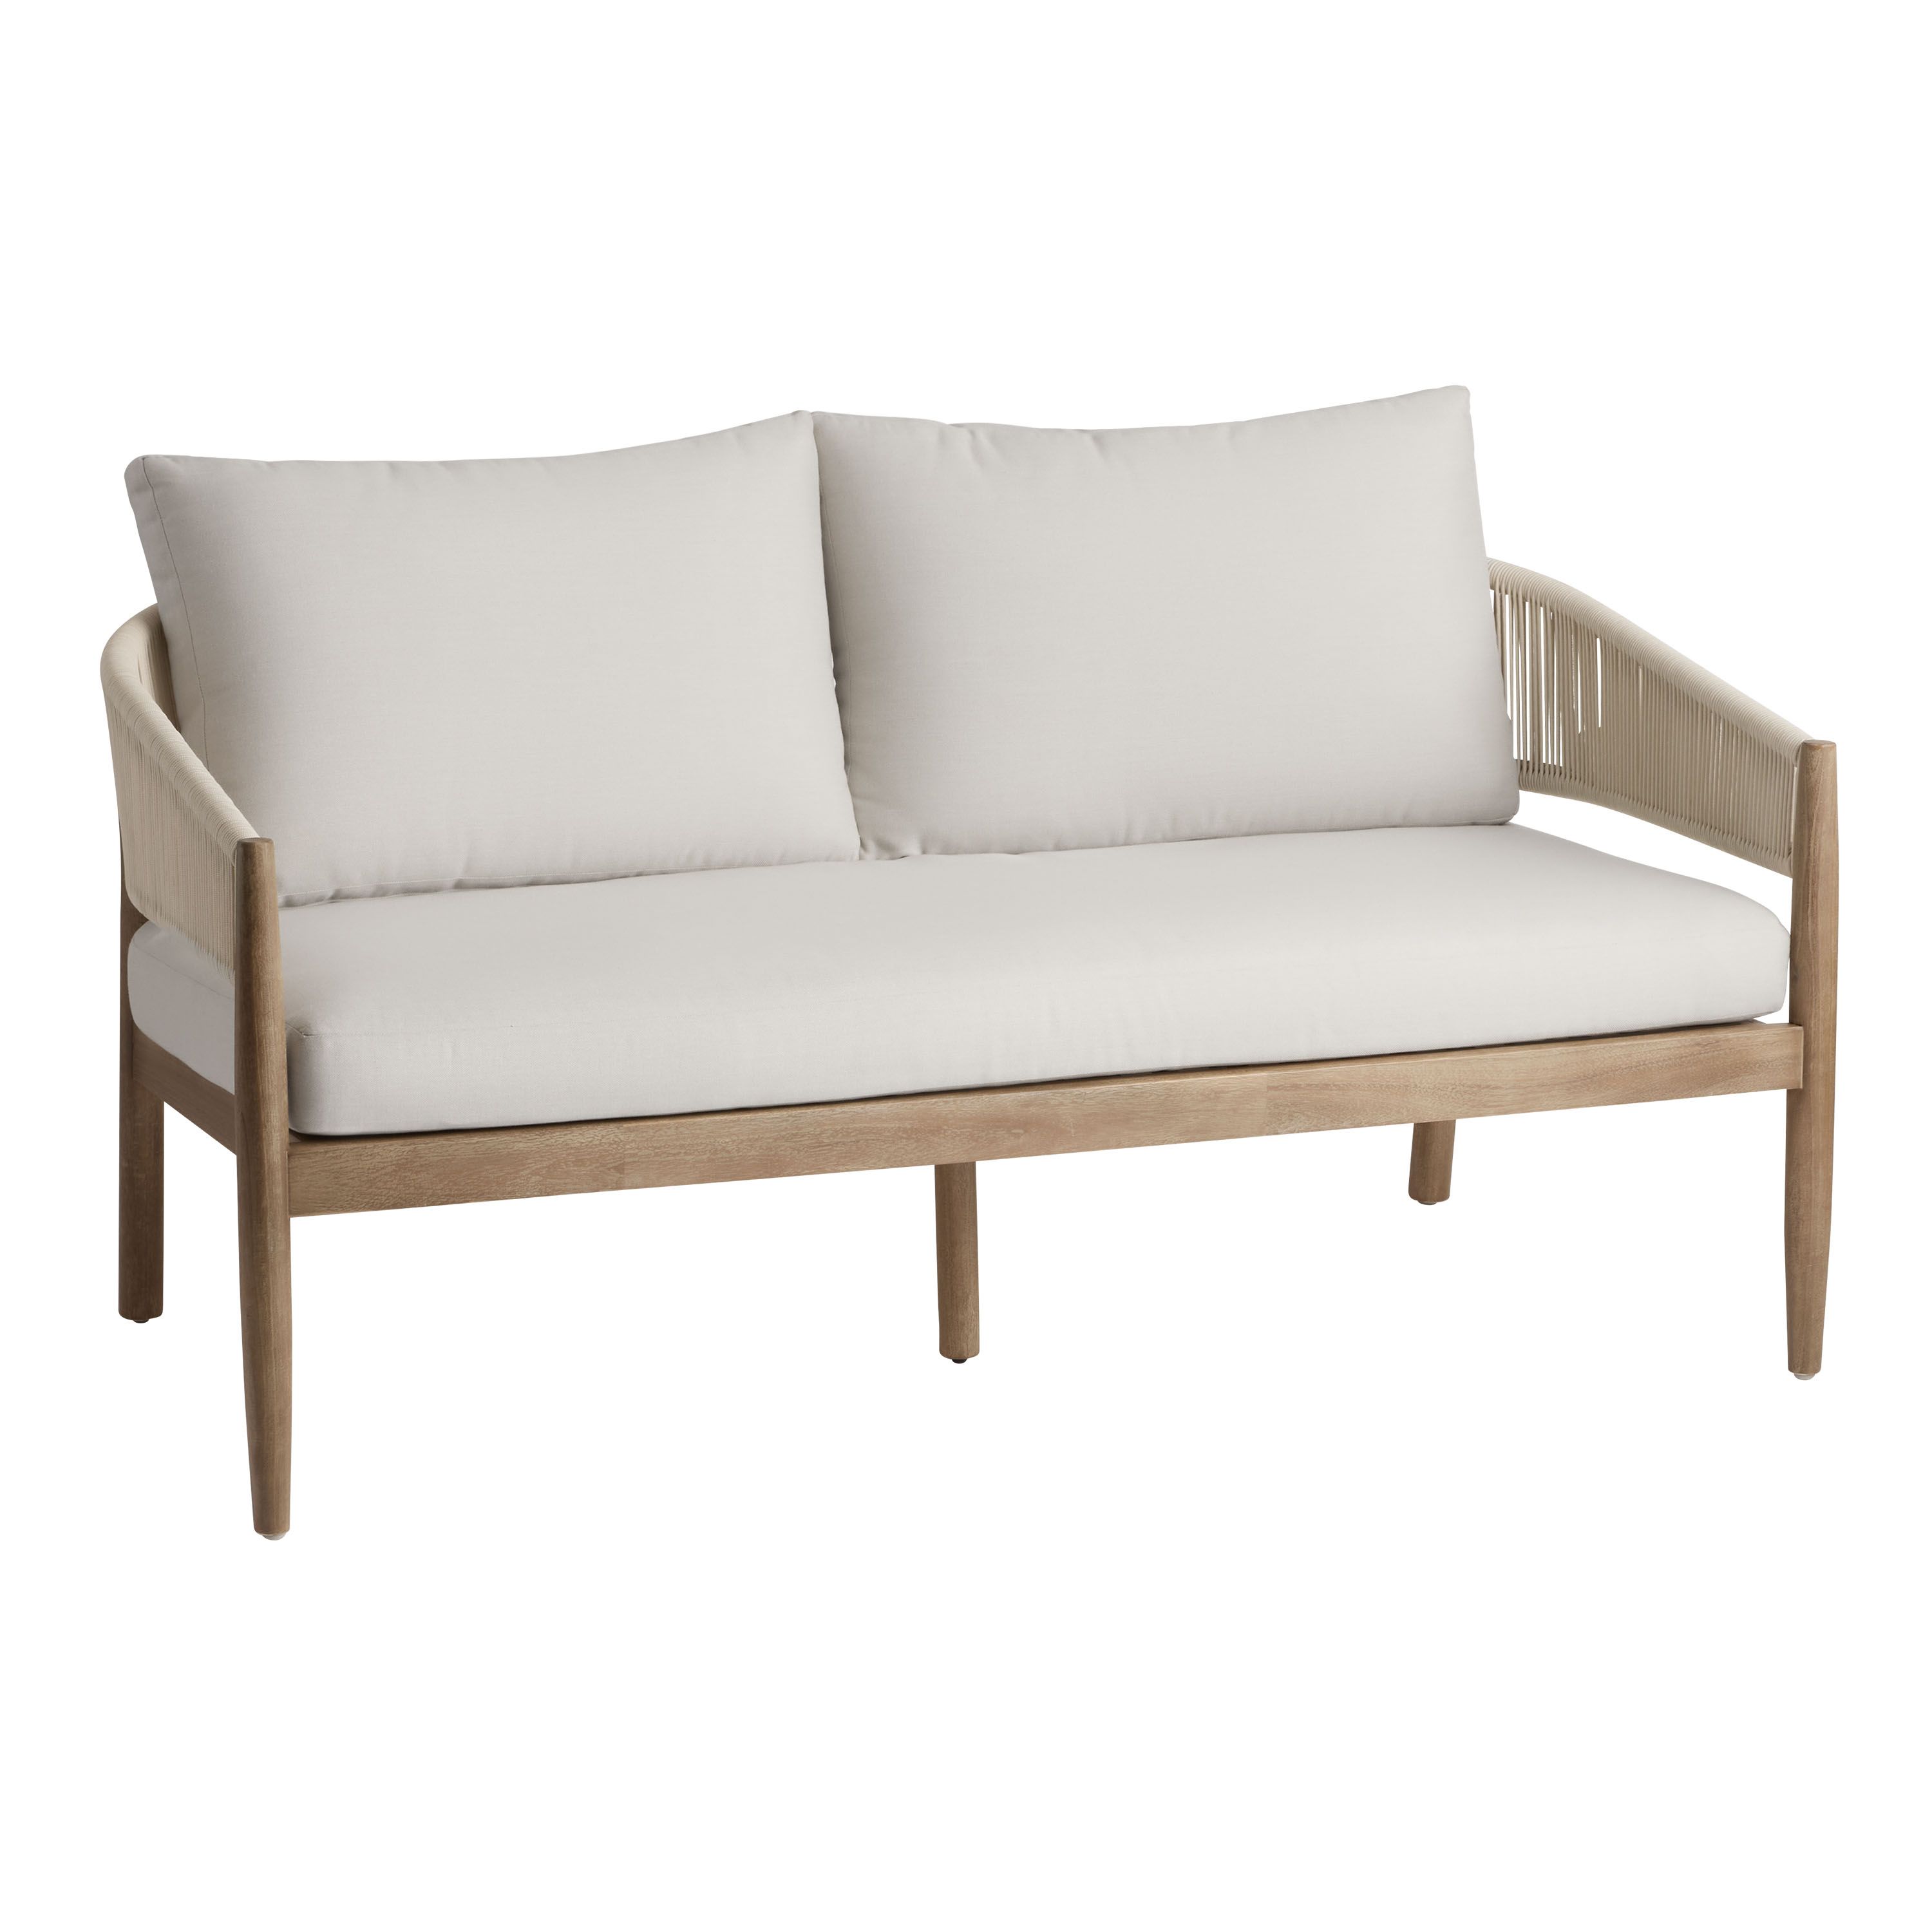 Cabrillo Acacia Wood And Rope Outdoor Loveseat | World Market